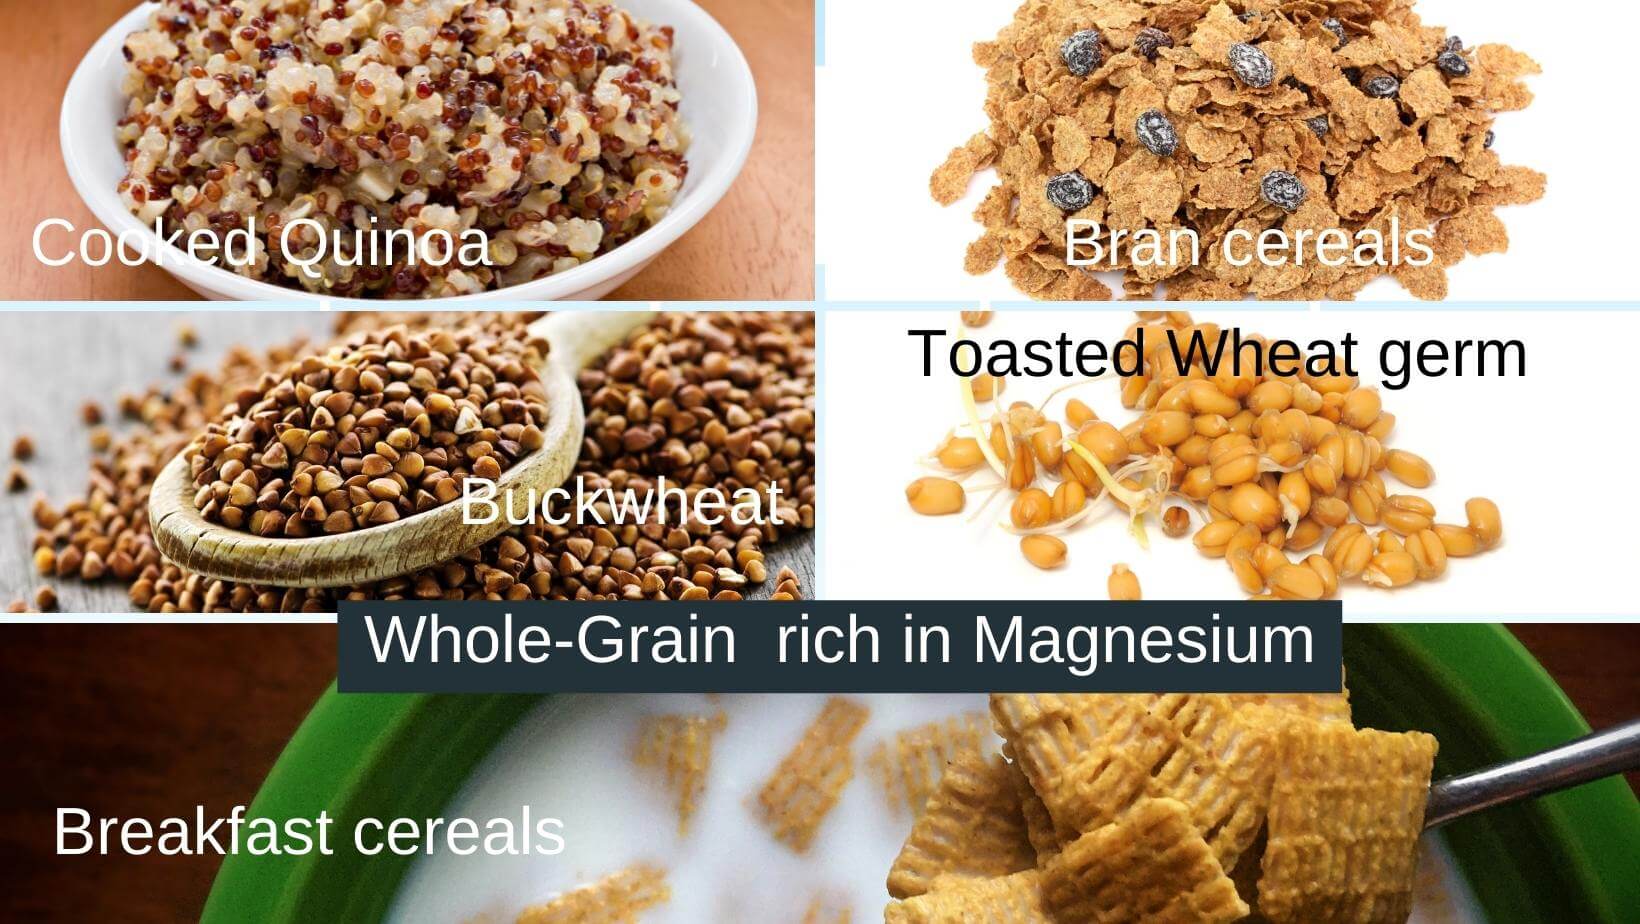 Whole grains high in magnesium